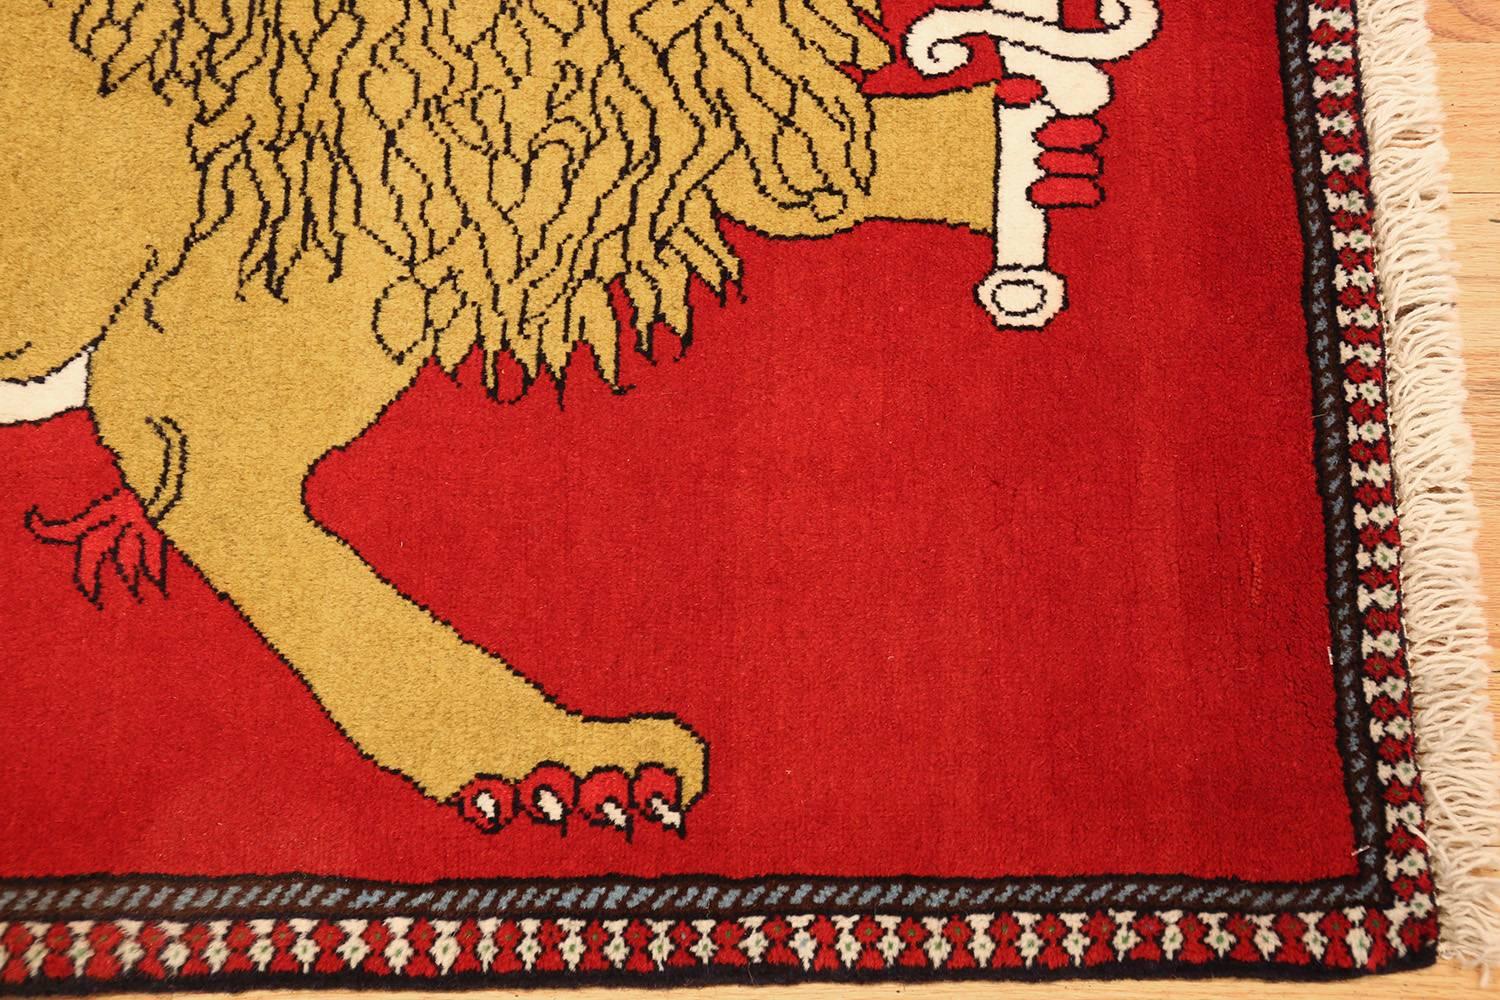 This fascinating rug from Qashqai features an armed Persian lion set against a red field, creating a commanding presence.

Vintage Persian Qashqai rug, origin: Persia, circa mid-20th century. Here is an absolutely intriguing antique Persian rug, a